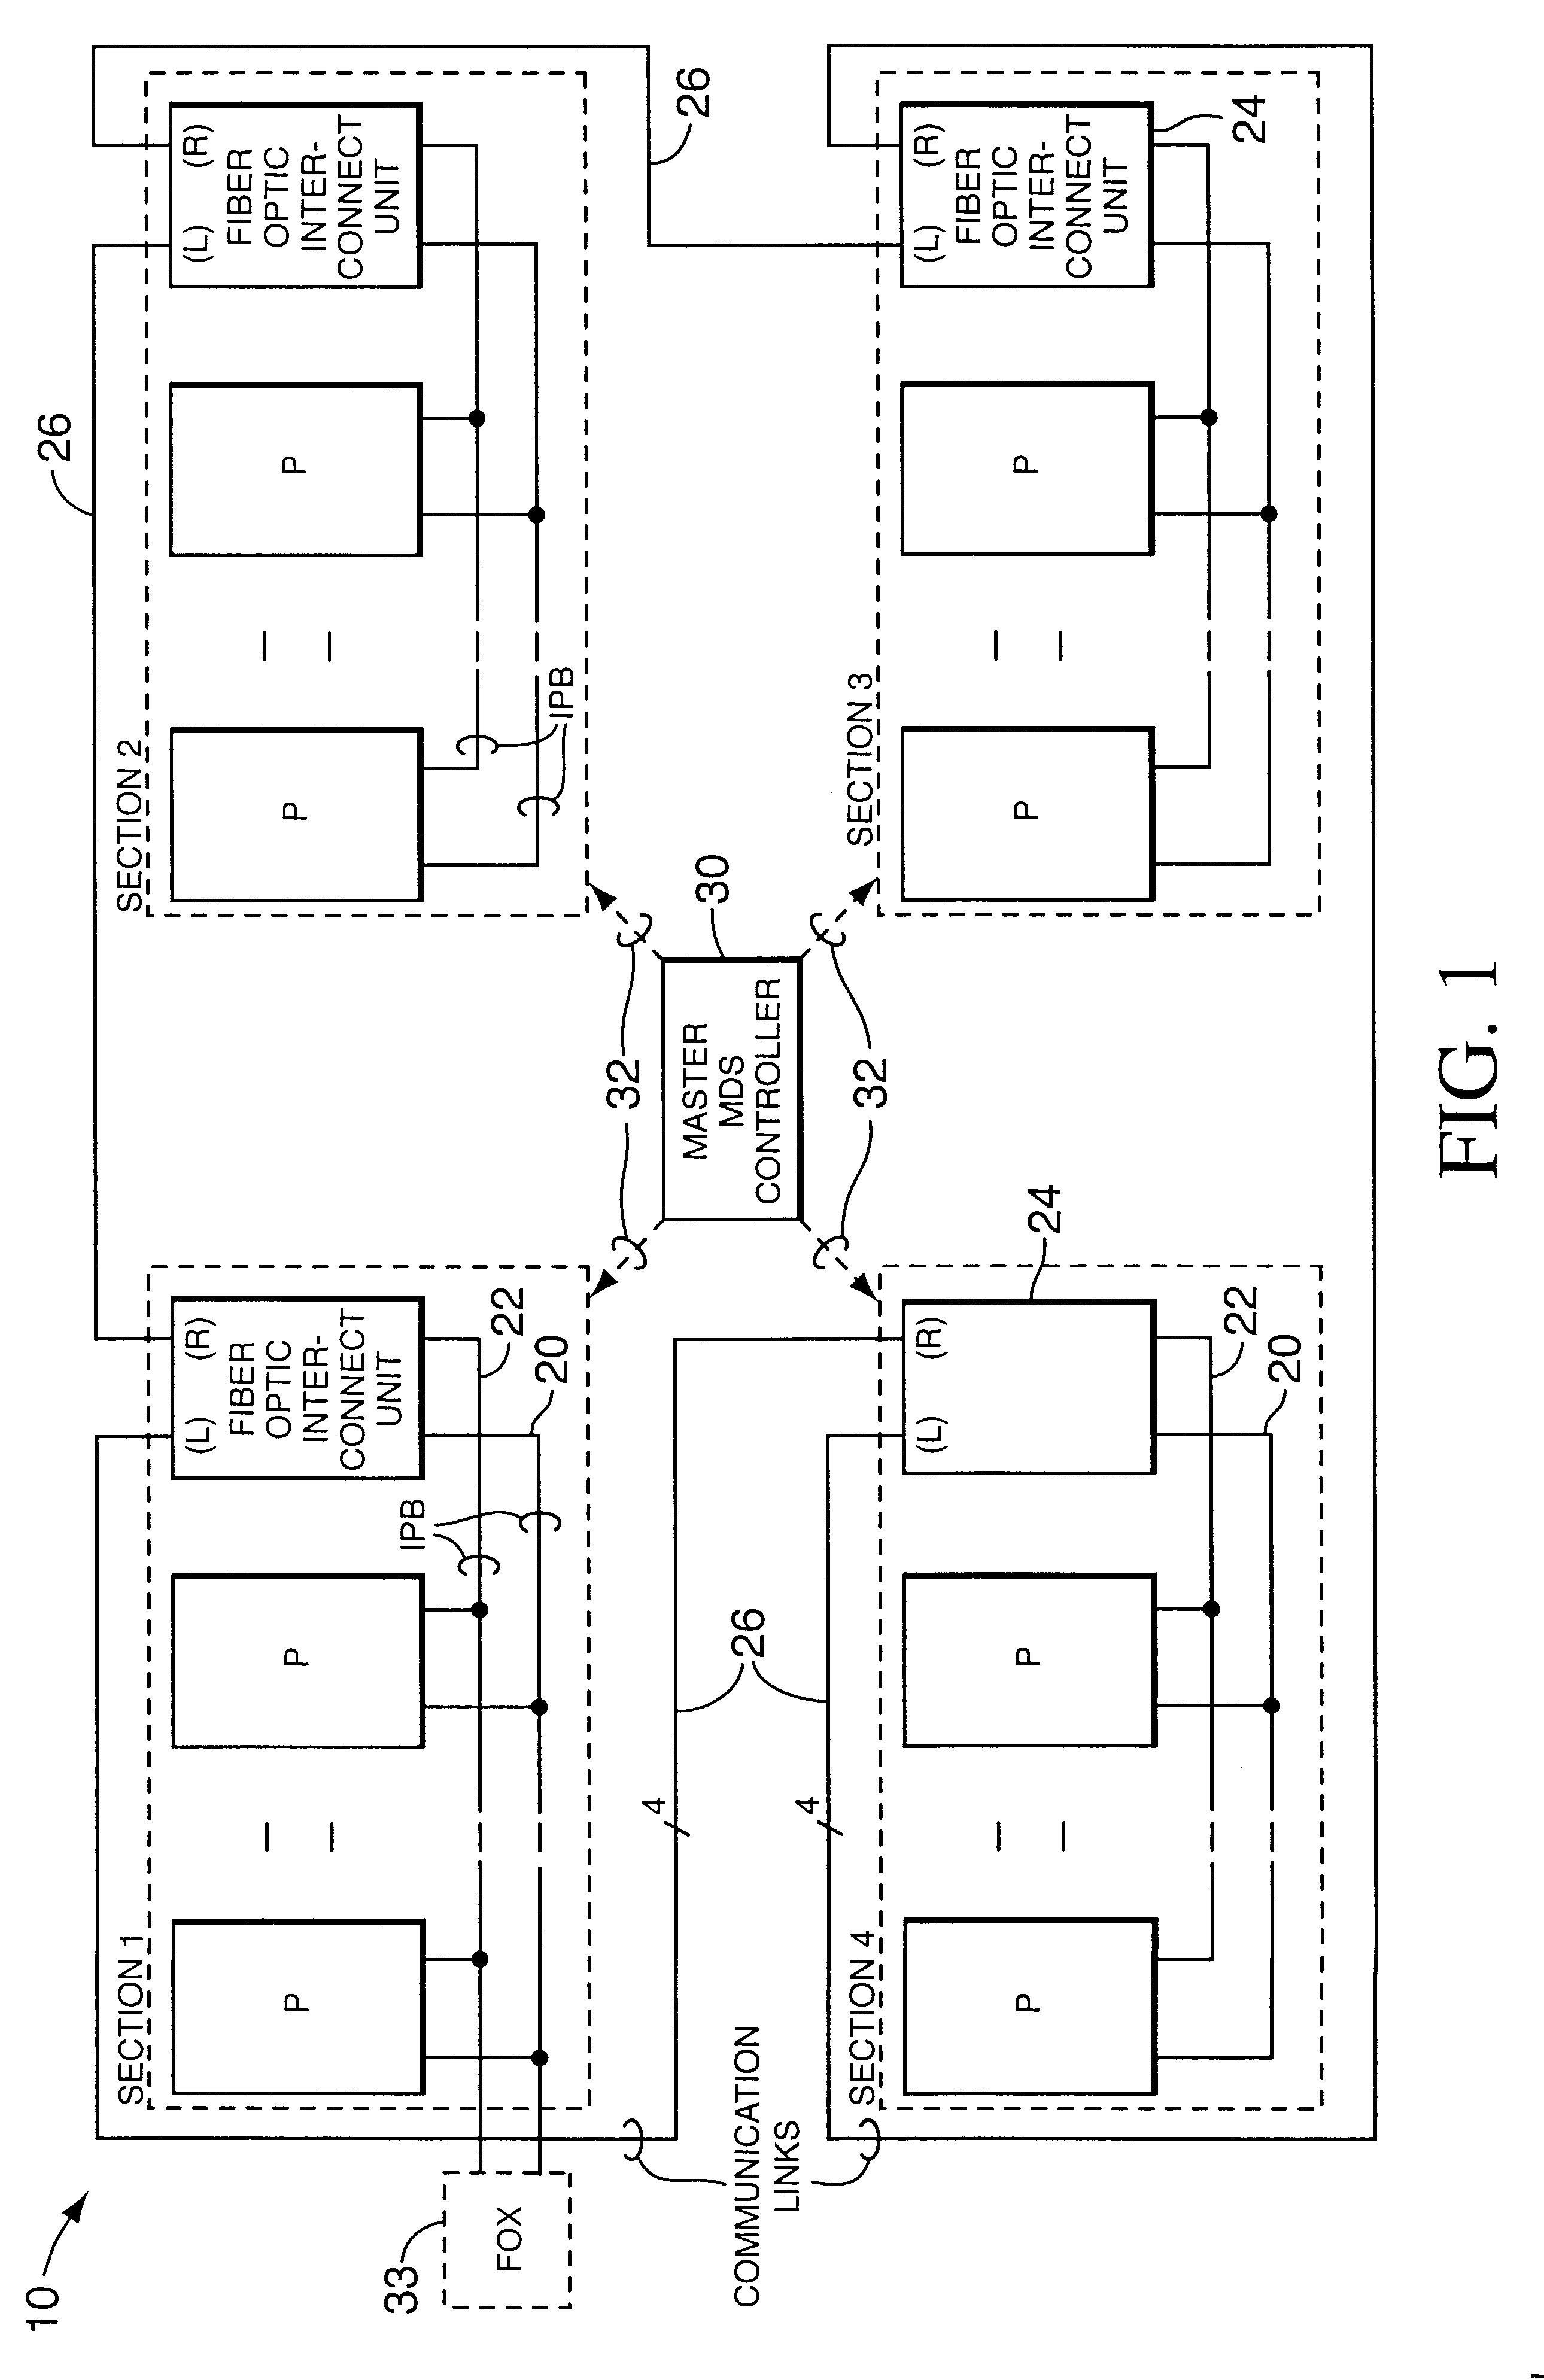 Multiprocessor system with fiber optic bus interconnect for interprocessor communications